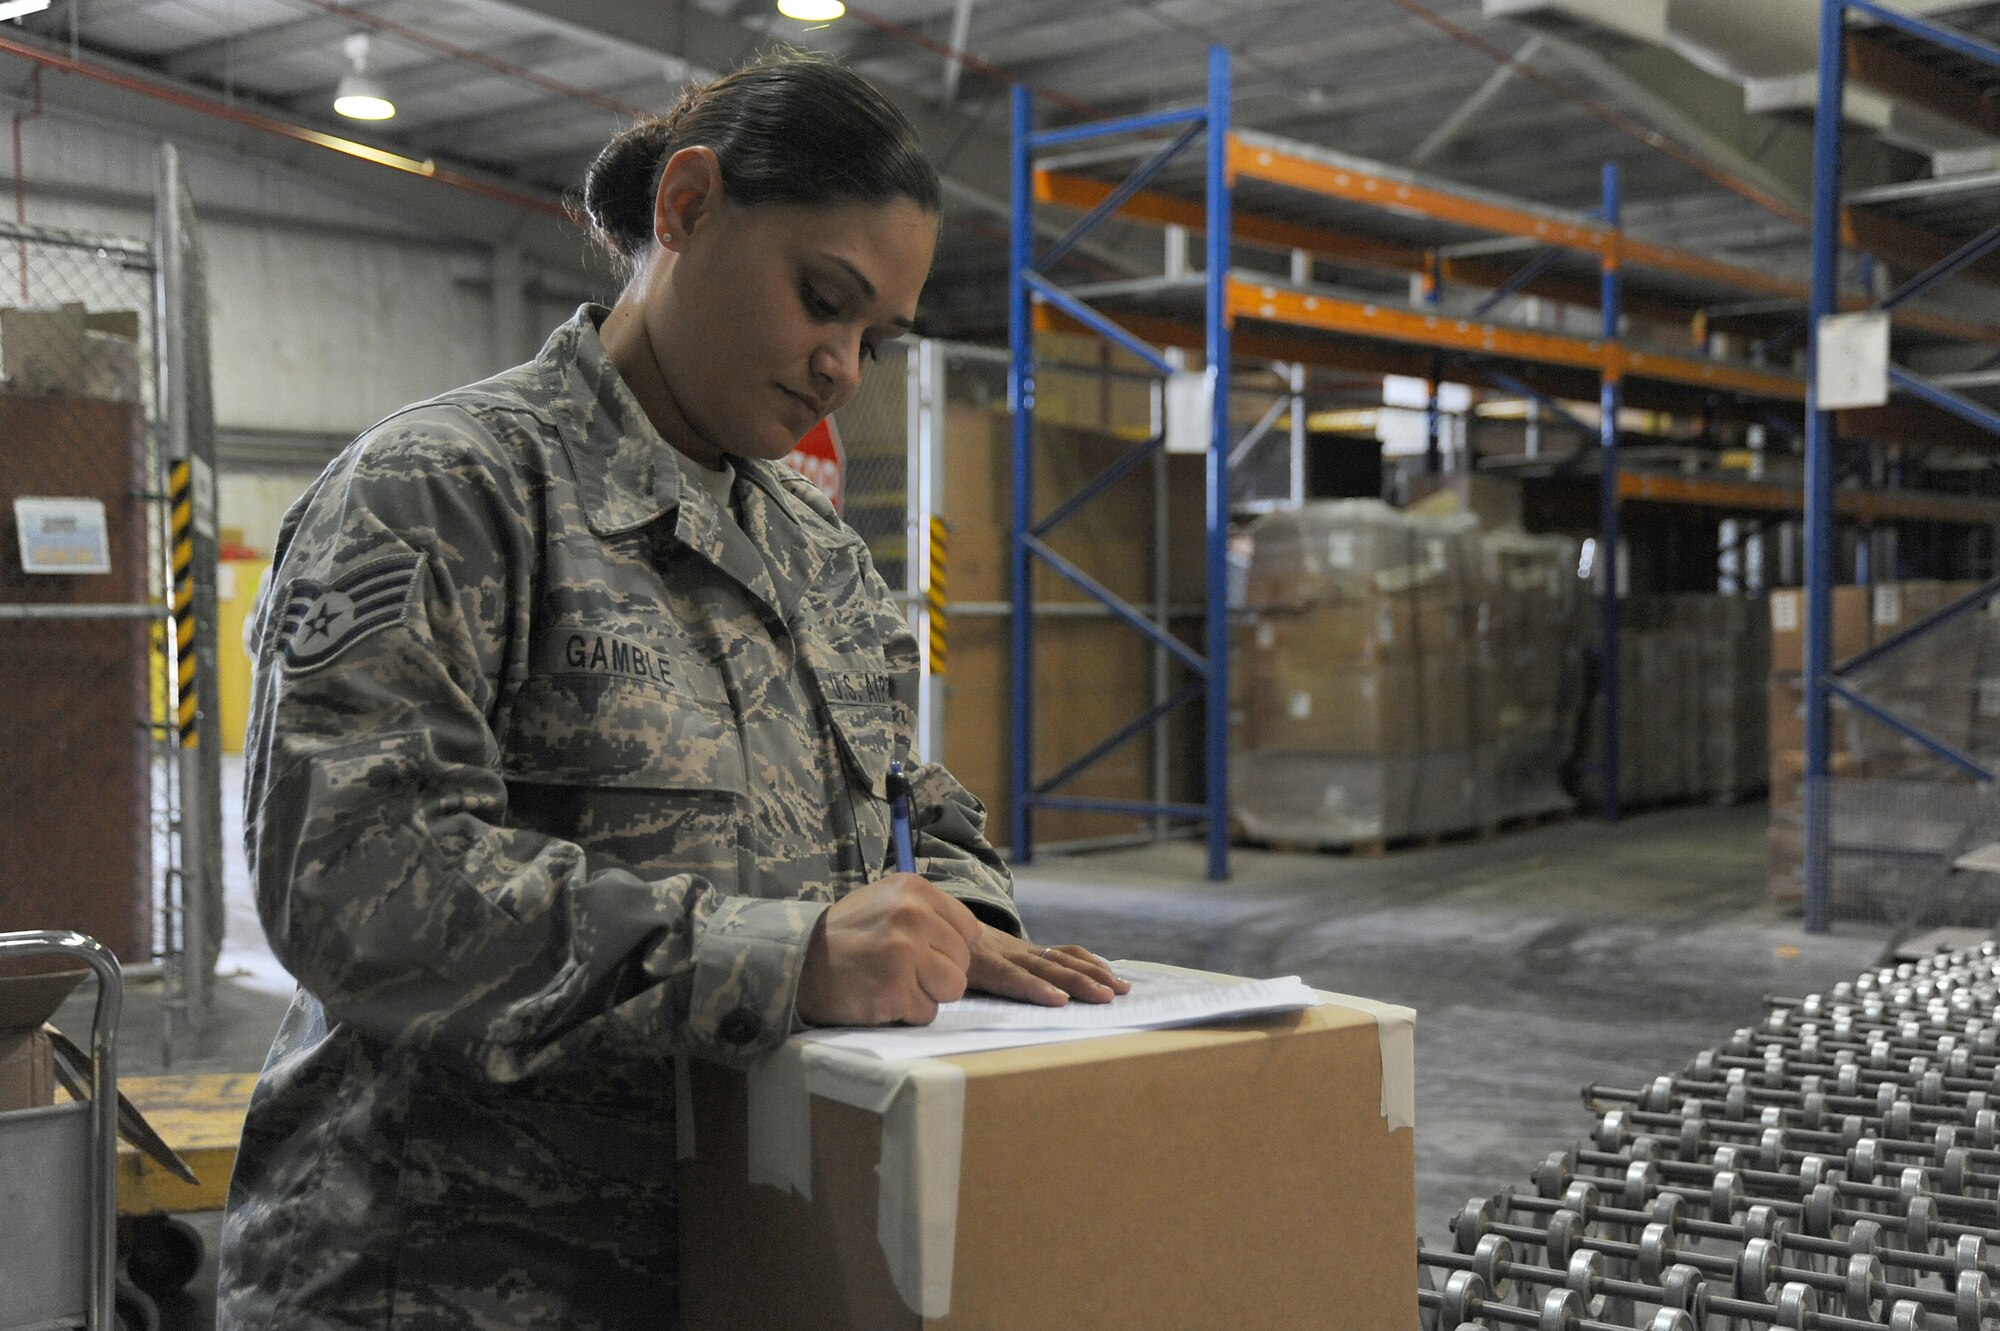 Staff Sgt. Michelle Gamble, 380th Logistics Readiness Squadron, writes down information for shipping labels, April 24 at an undisclosed location in Southwest Asia. All the supplies the base needs runs through ELRS making them a vital part of the 380th Air Expeditionary Wing's mission. Sergeant Gamble is deployed from Holloman AFB, N.M. and hails from Spring Hill, Fla. (U.S. Air Force photo by Senior Airman Brian J. Ellis) (Released)